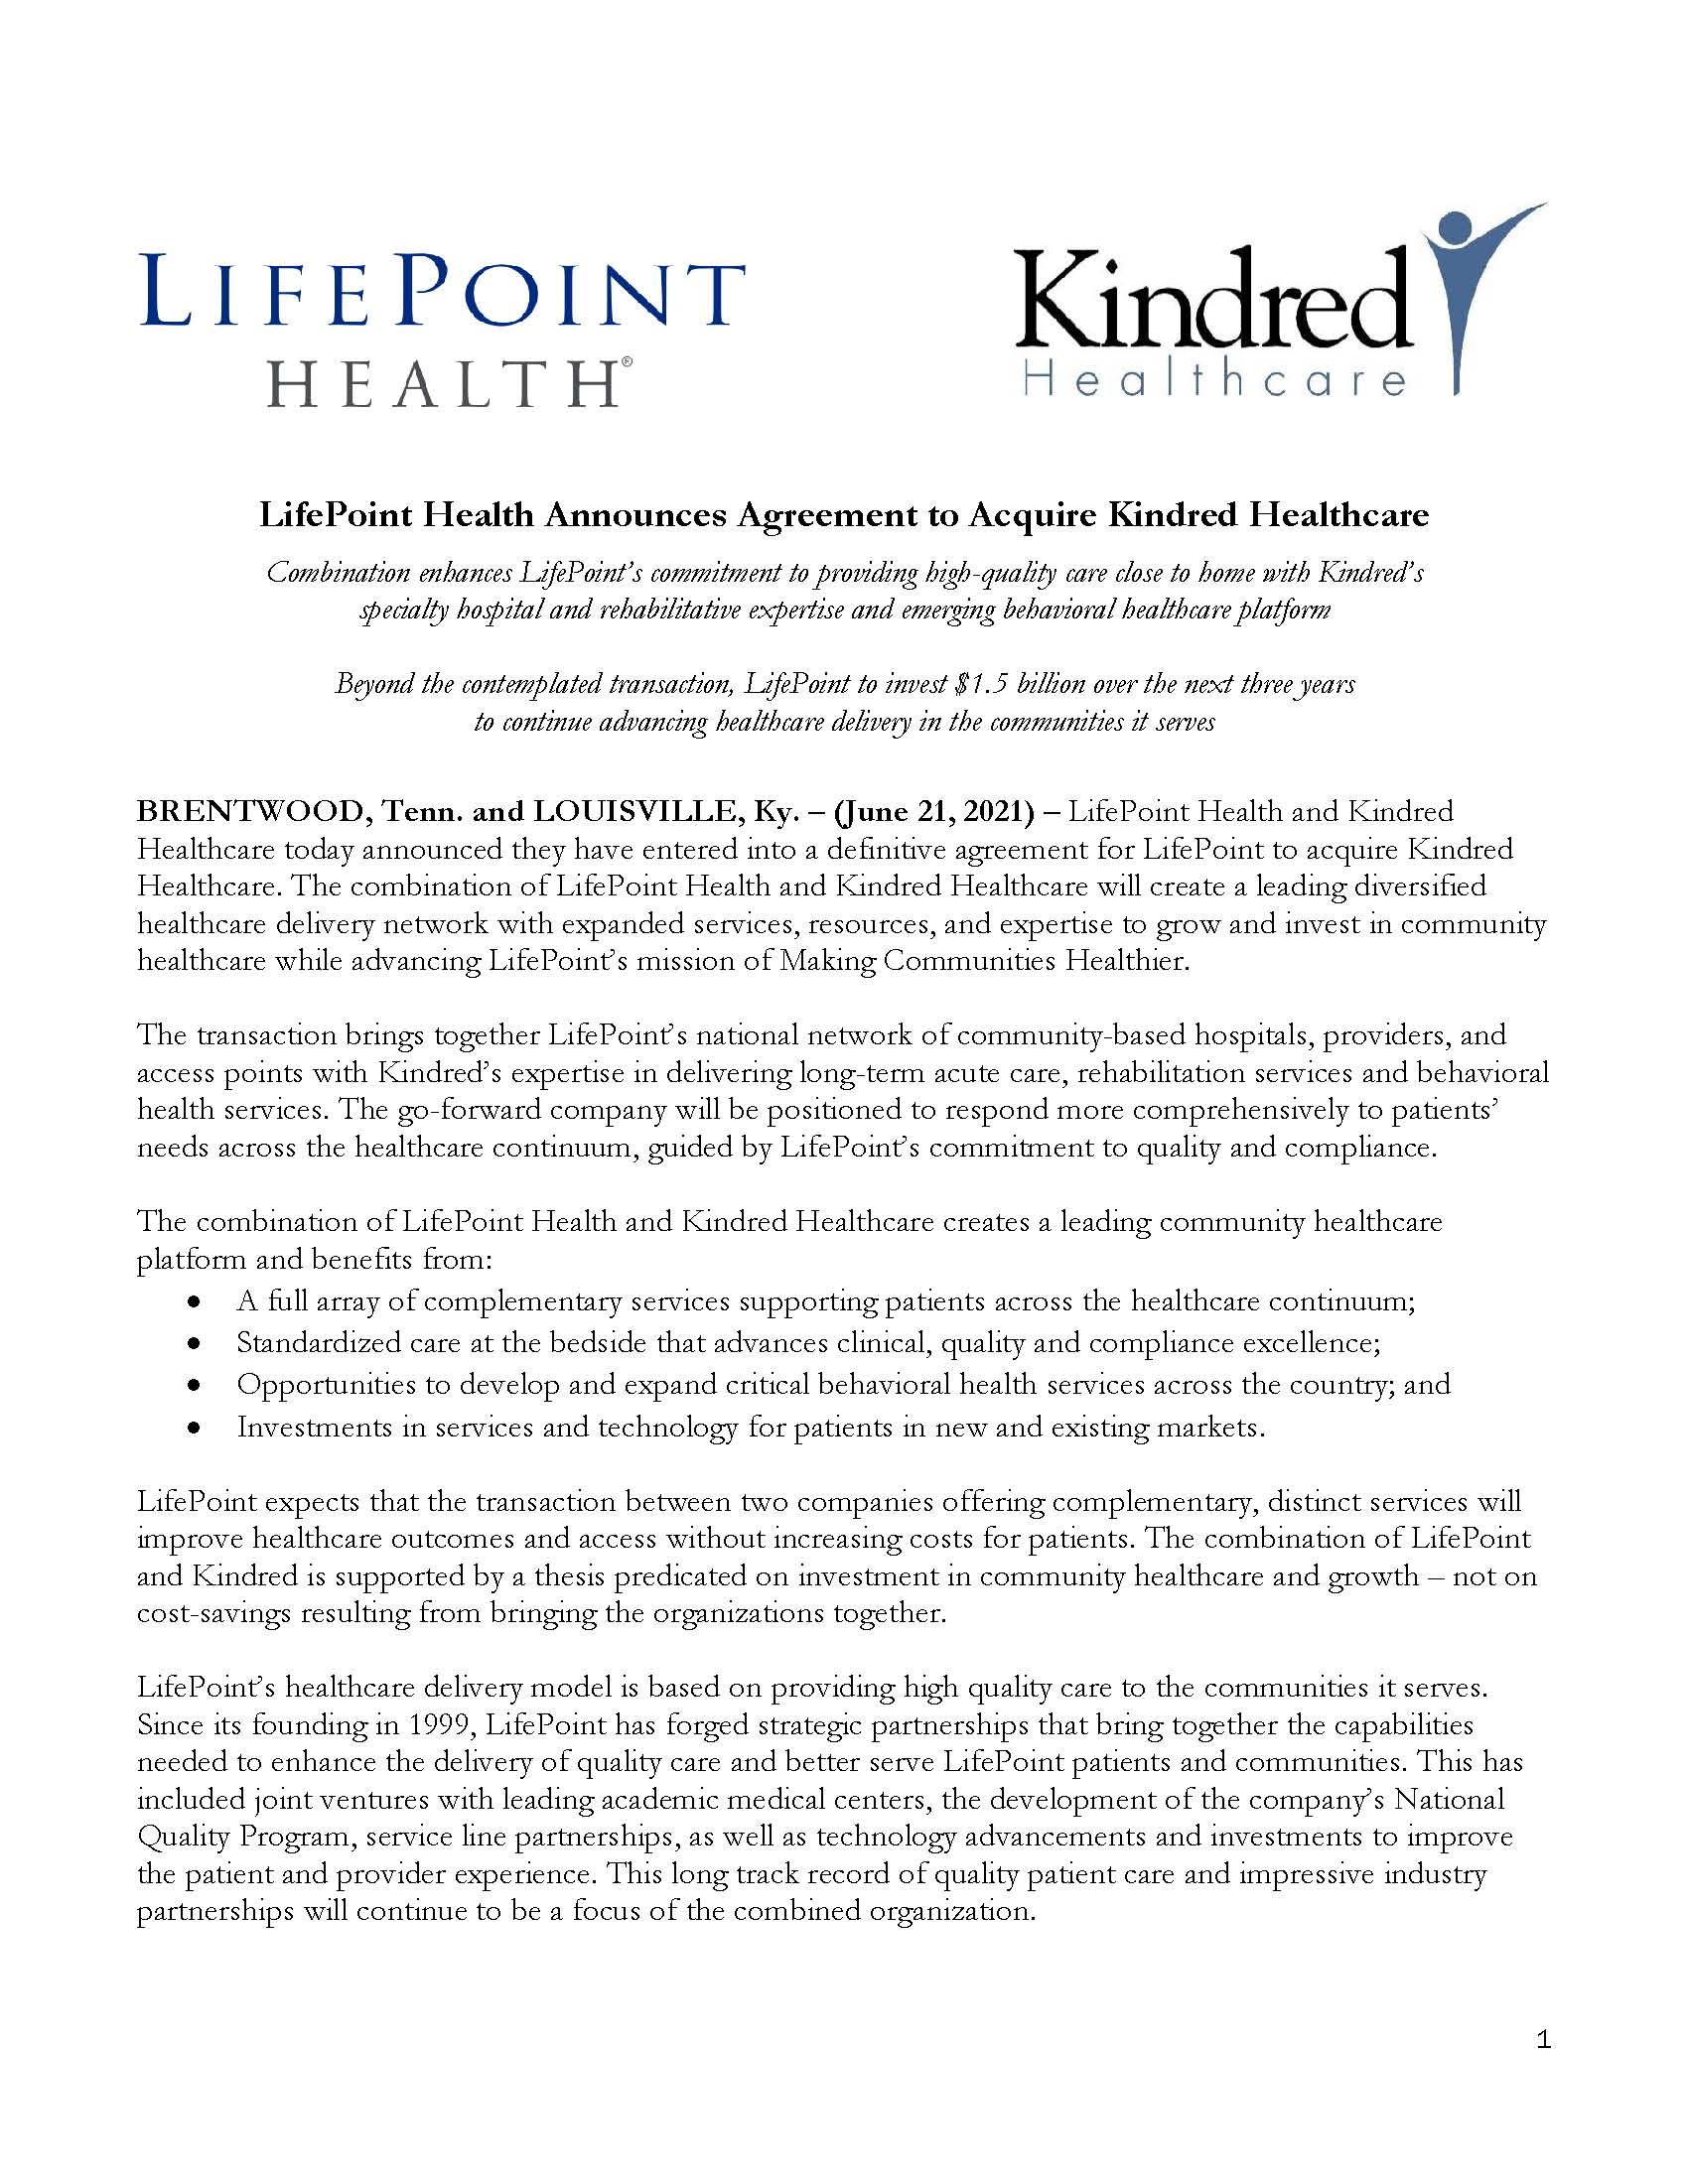 LifePoint Kindred Press Release 06.21.21 FINAL_Page_1